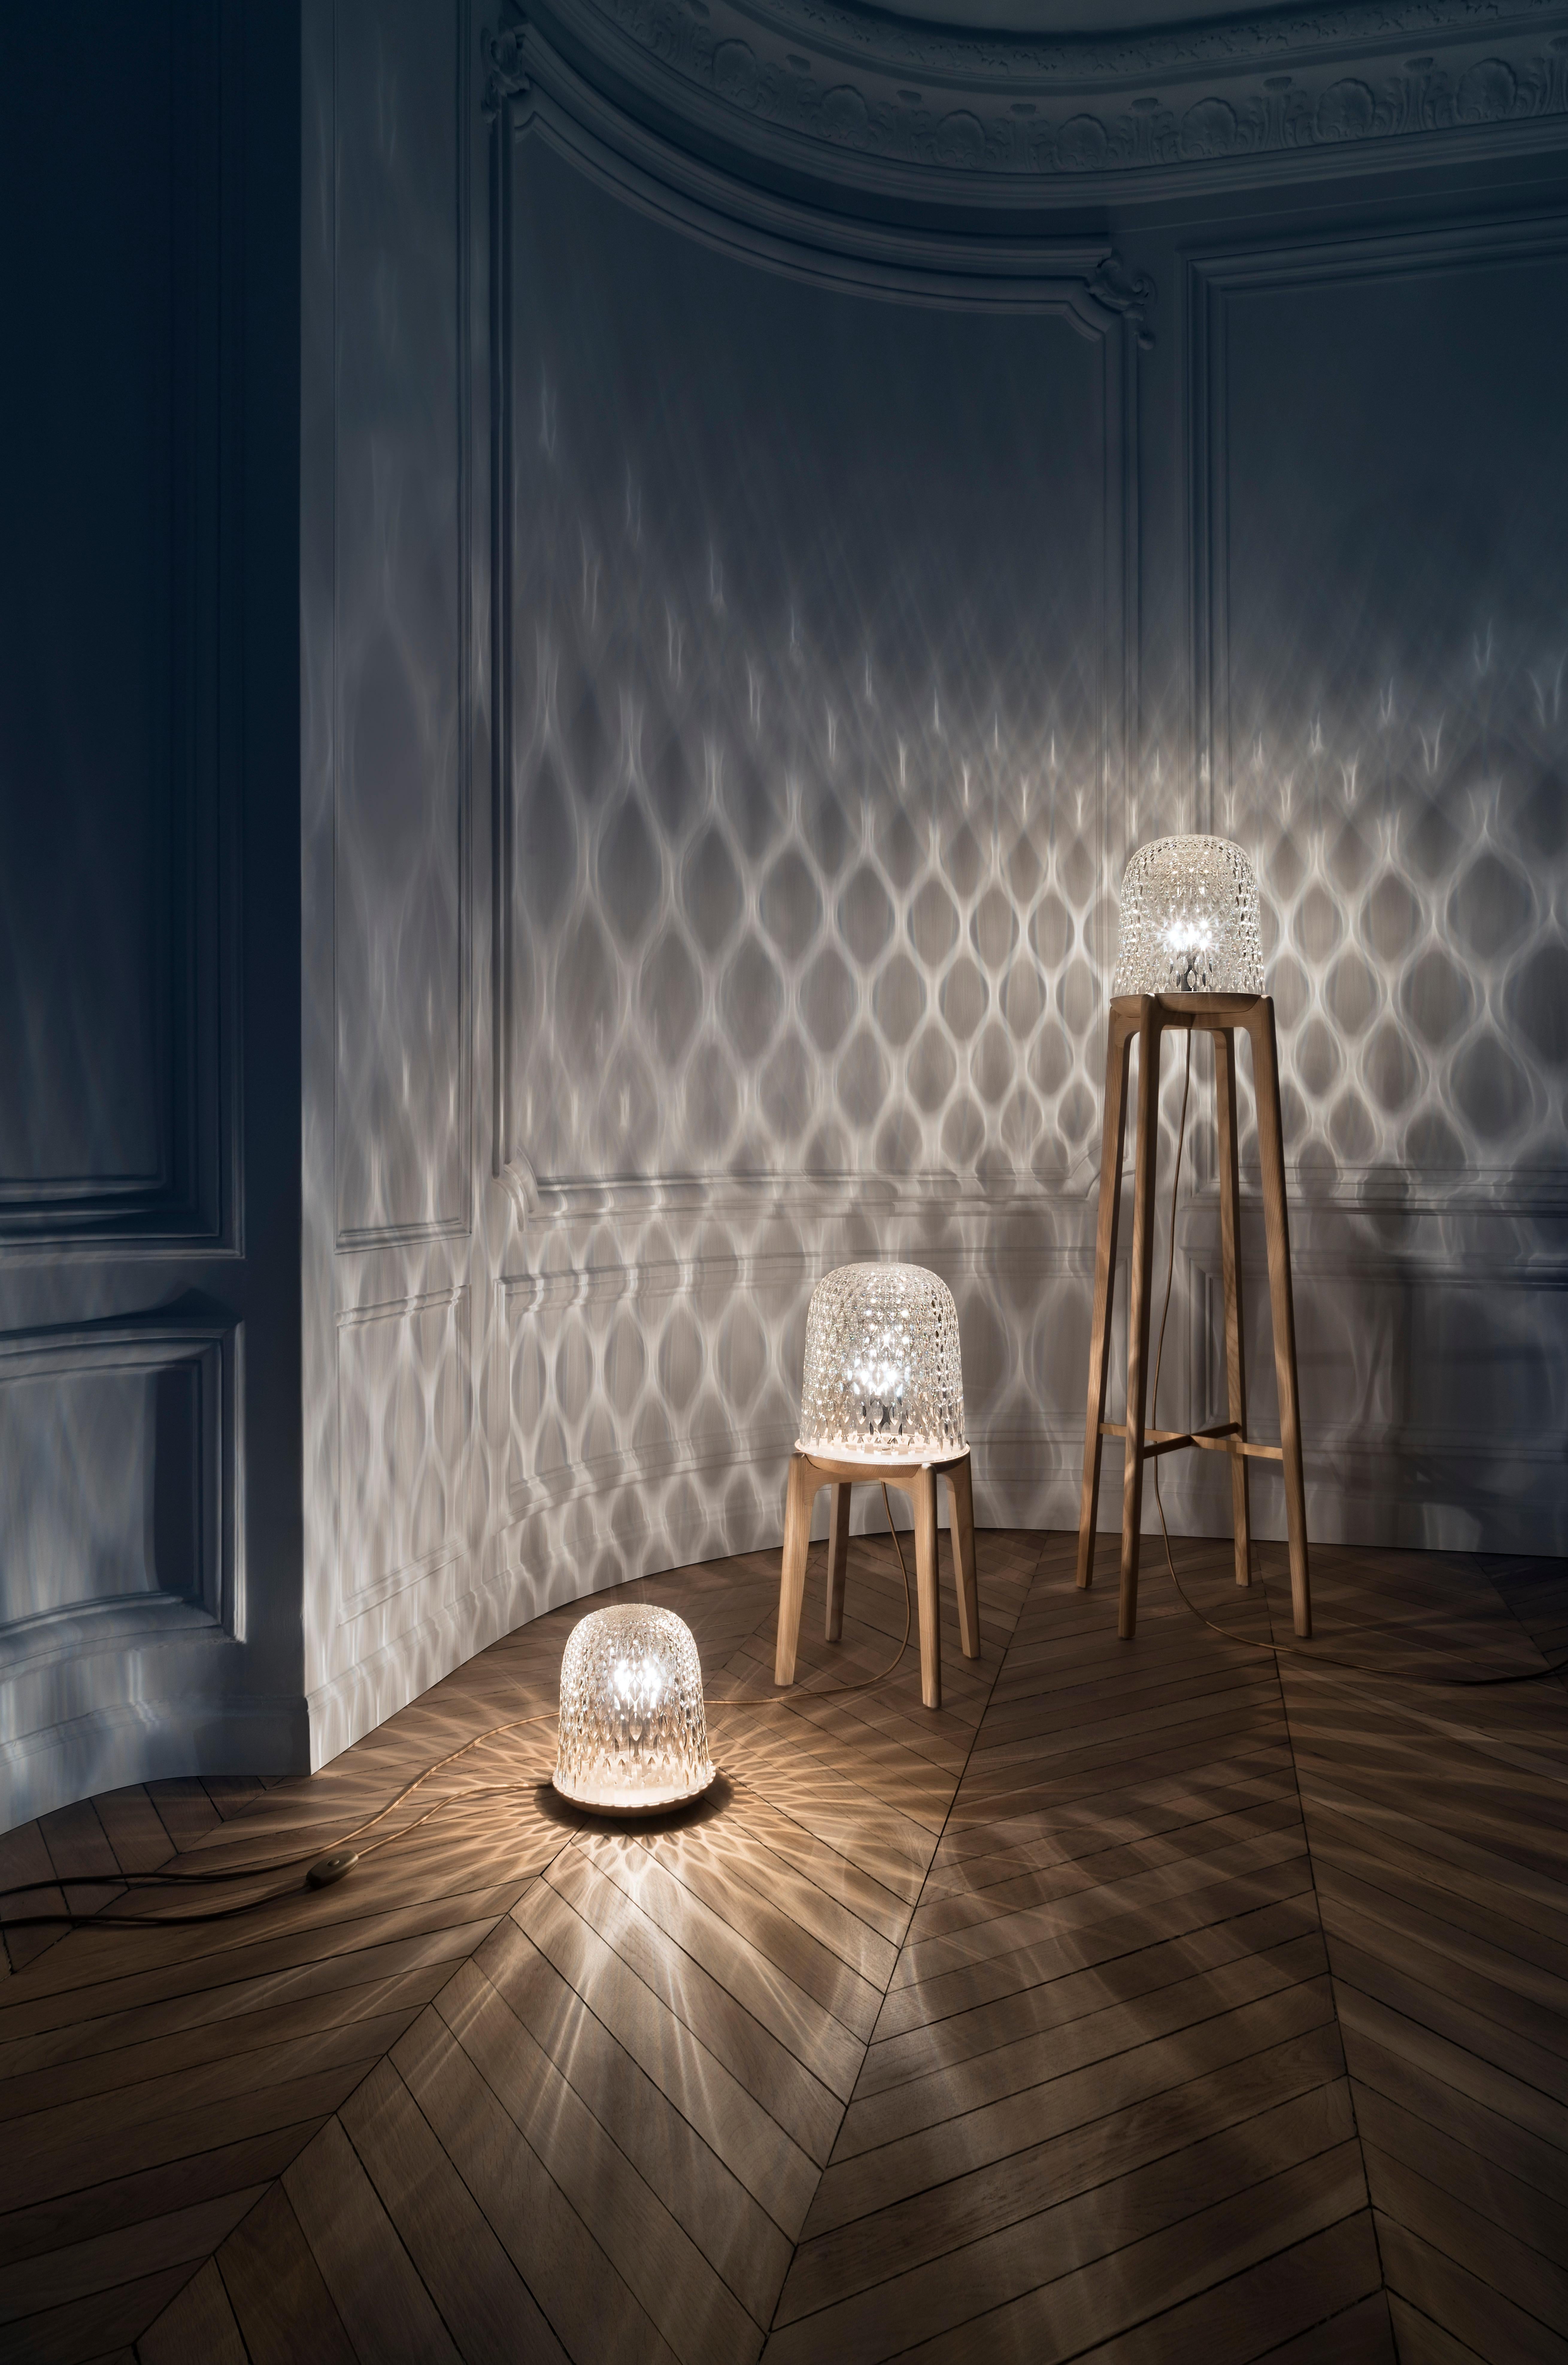 Saint-Louis is the oldest crystal manufacturer in Europe, originating in Lorraine, France and founded in 1586. As a tribute to the leaves of the Moselle forest and to creative folly, Noé Duchaufour-Lawrance created the Folia cross-disciplinary